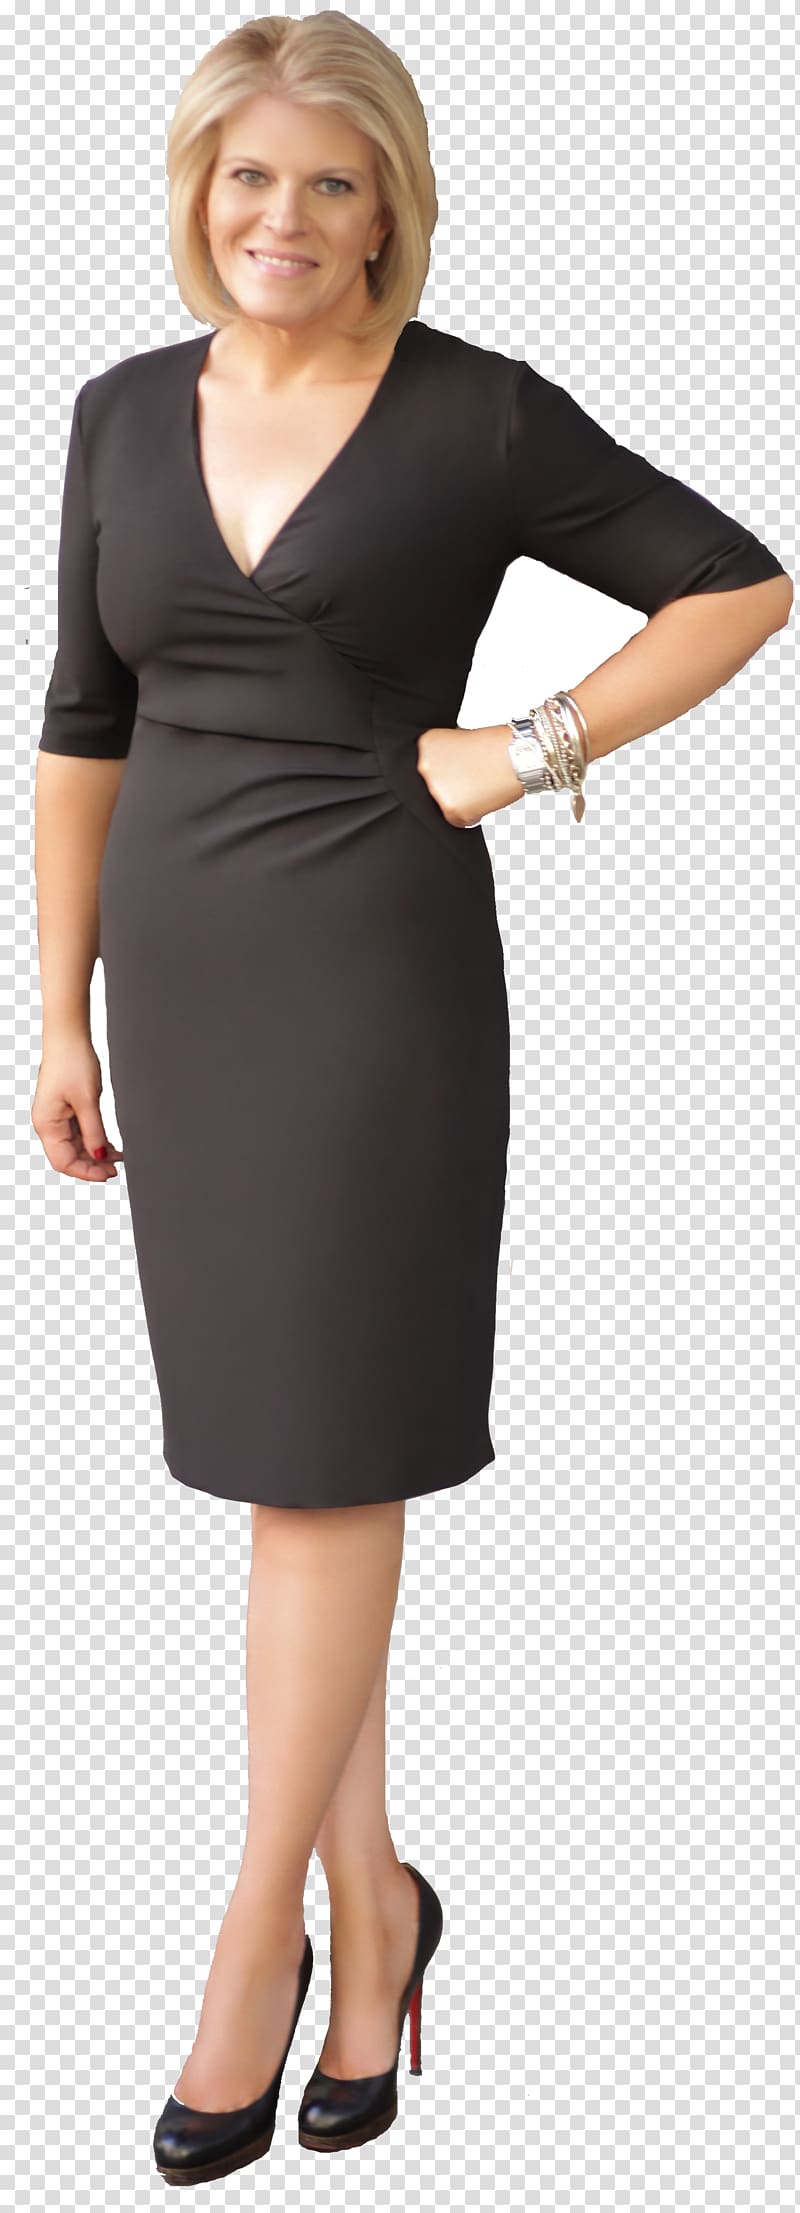 Tory Johnson Spark & Hustle: Launch and Grow Your Small Business Now Dress Female, business woman transparent background PNG clipart